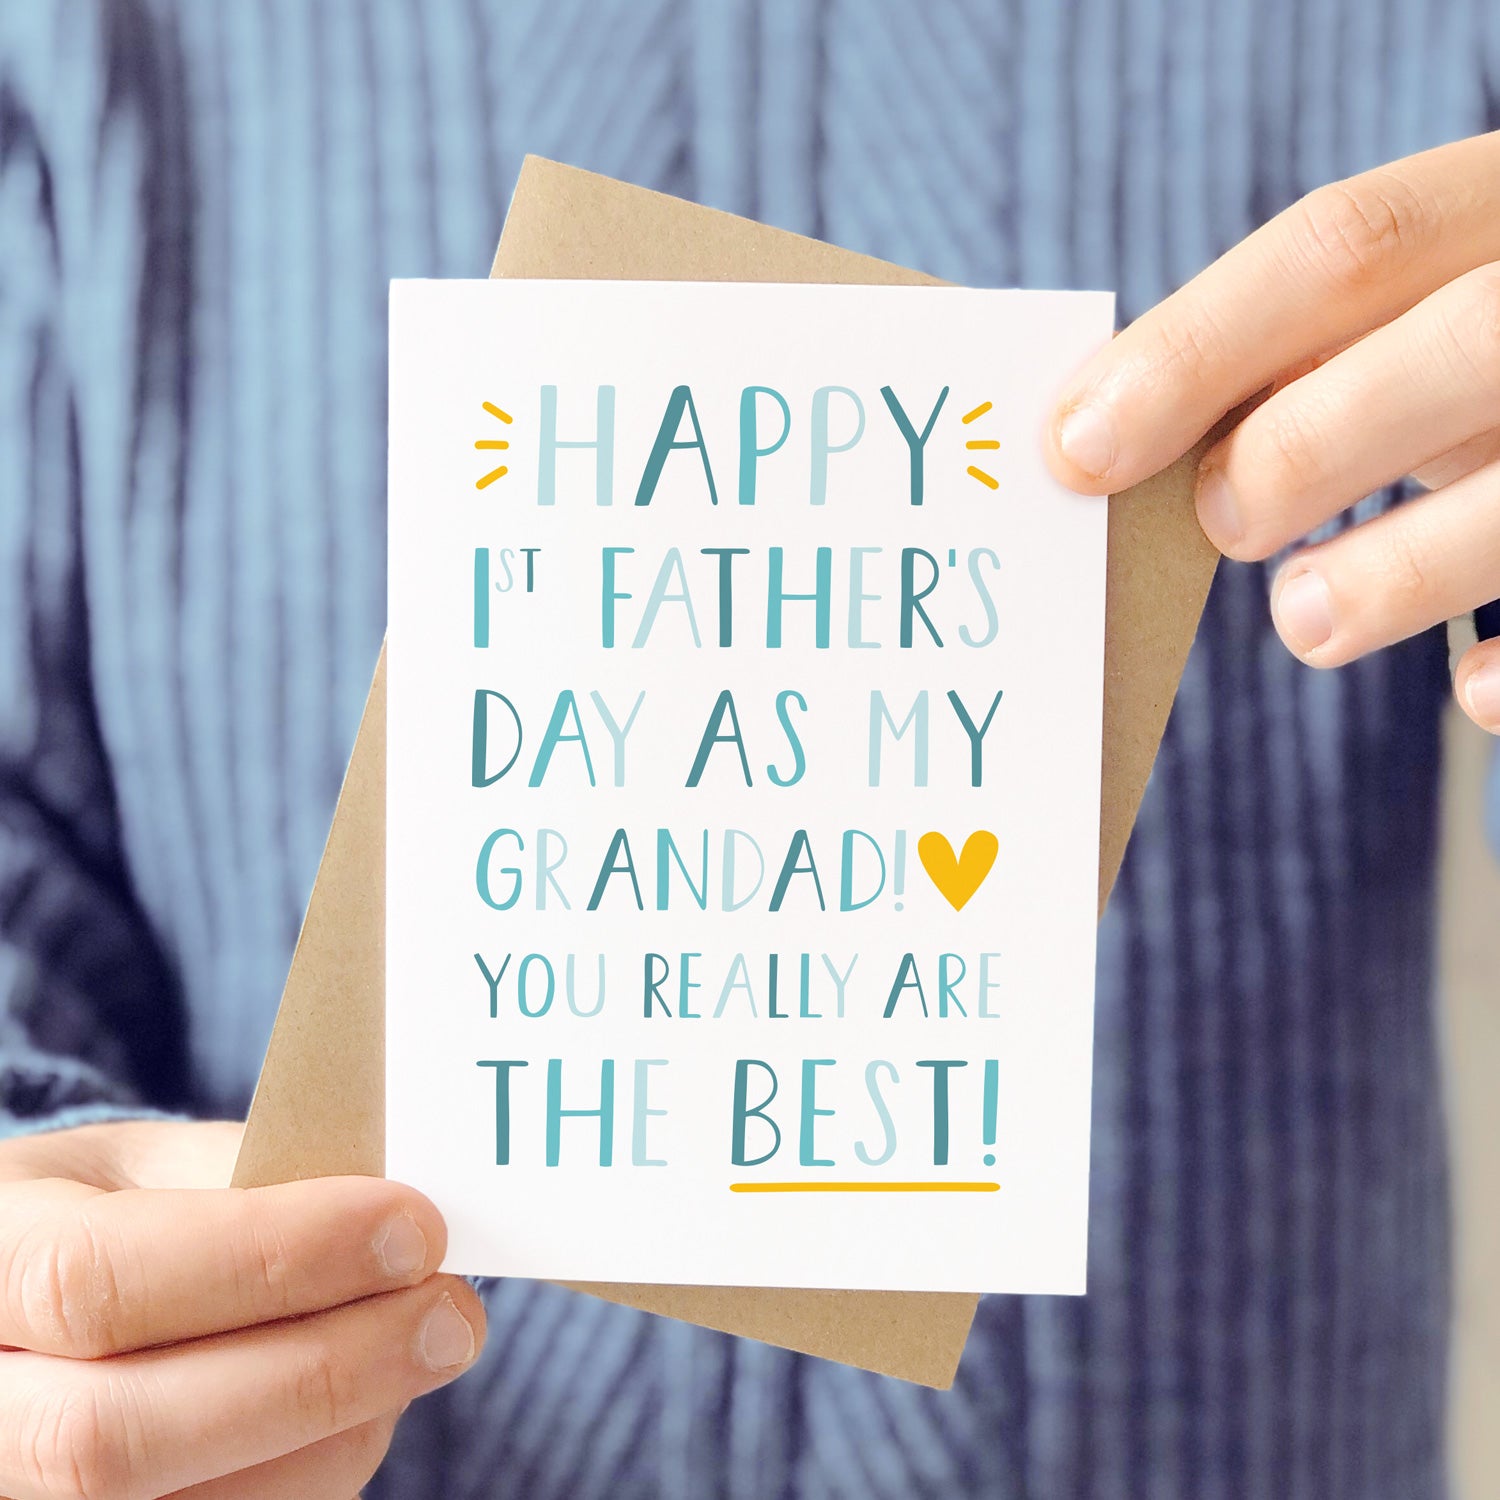 'Happy 1st Father's Day as my Grandad! You really are the best!' Photographed being held in front of a man wearing a grey blue knitted jumper and being held with it's kraft brown envelope.